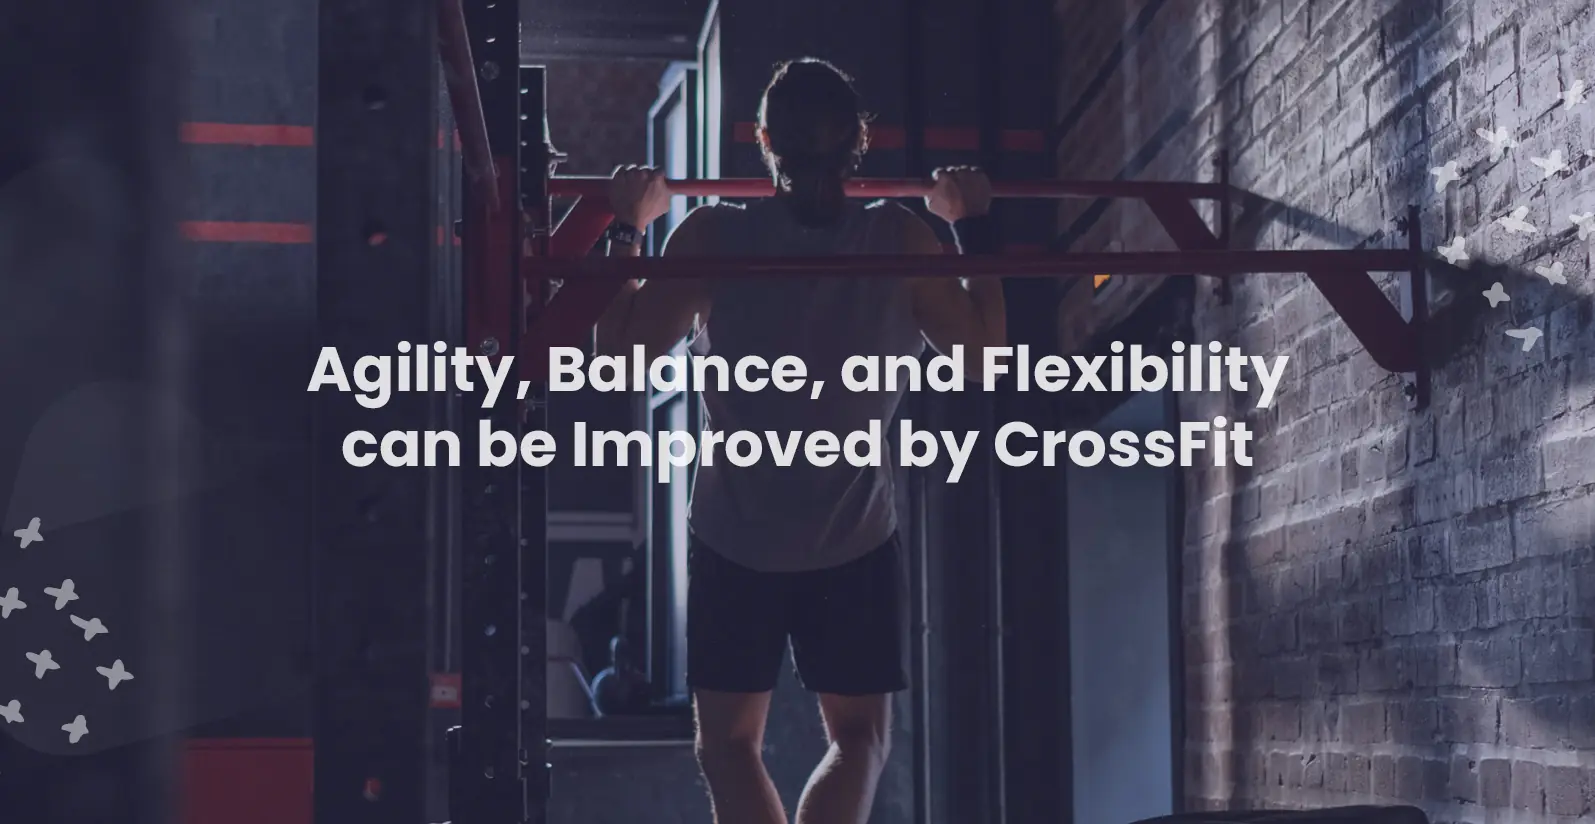 Agility, Balance, and Flexibility can be Improved by CrossFit